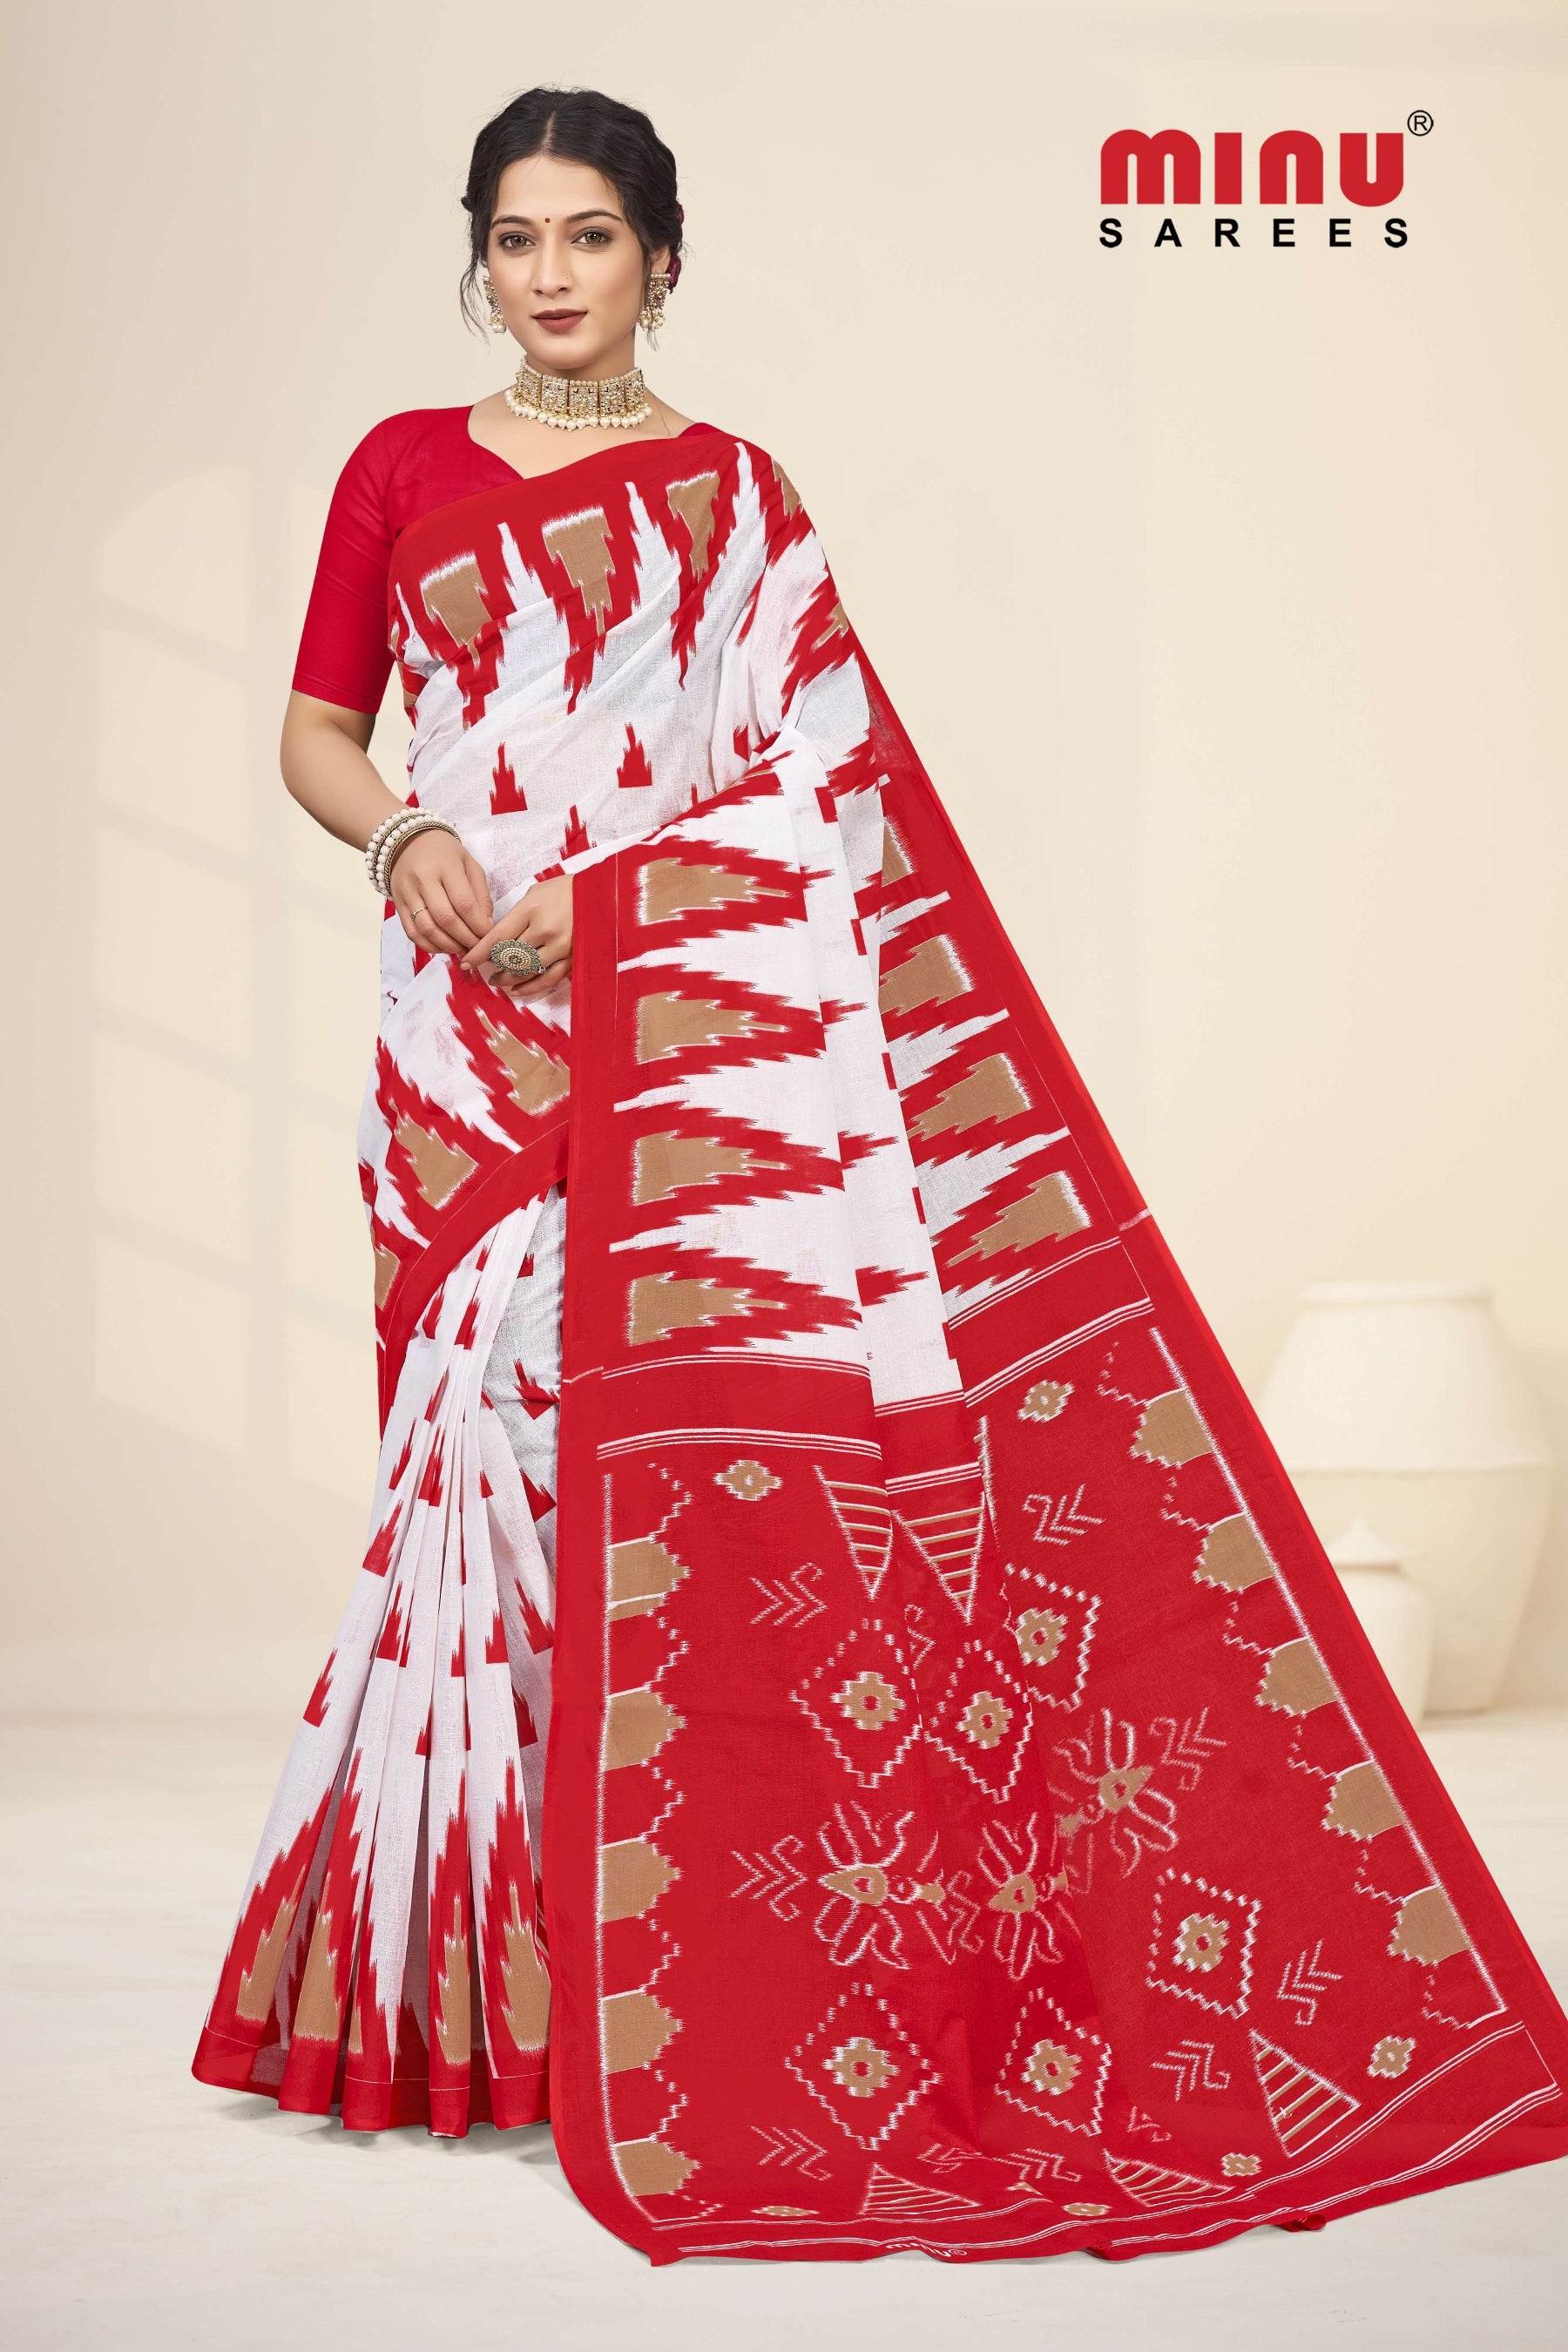 Best fashionable printed saree wearing woman 